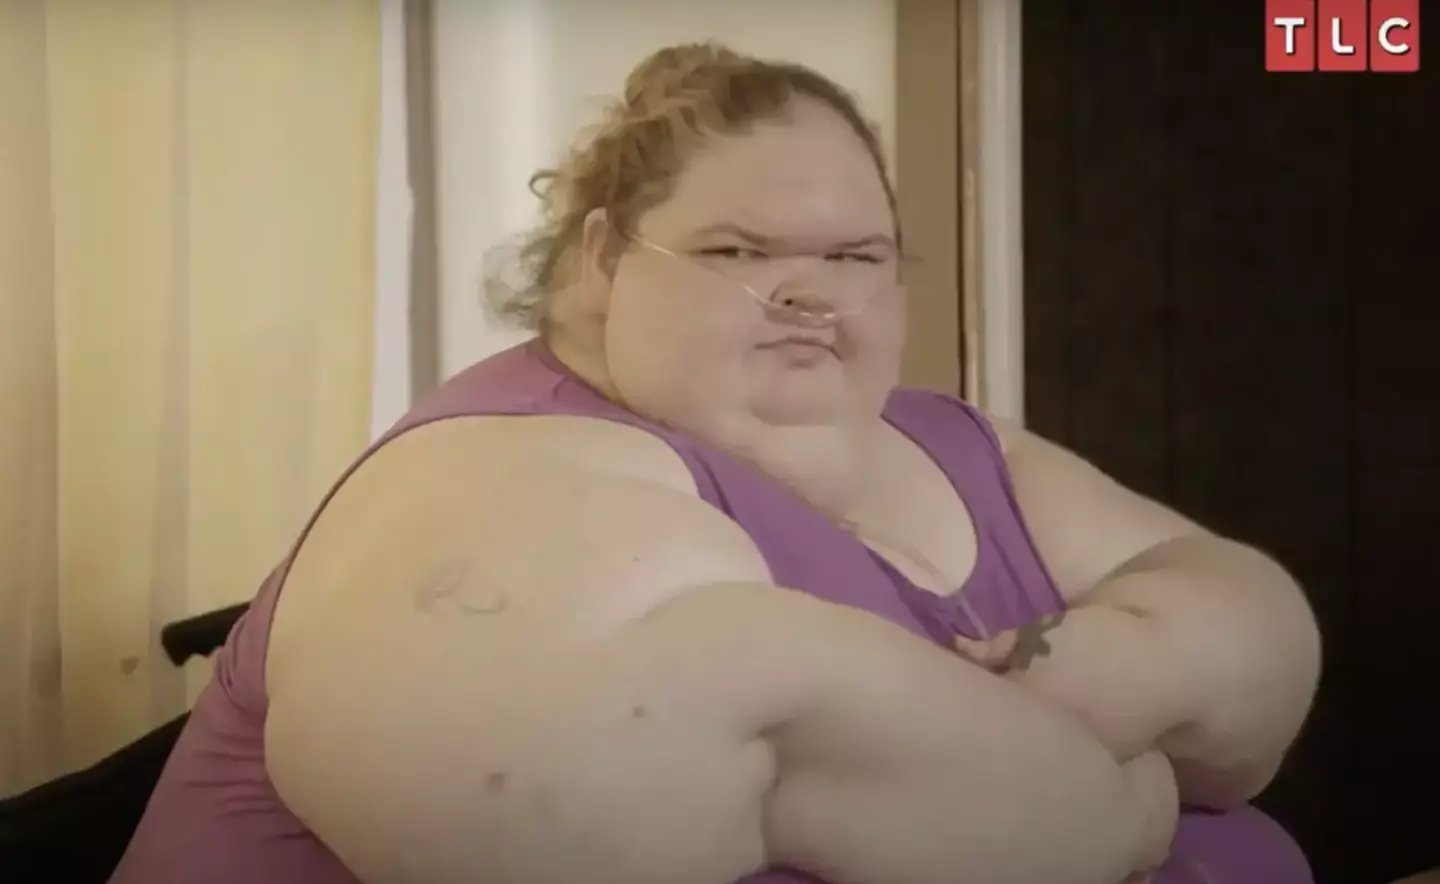 Tammy appeared on TLC's 1000Lb Sisters.